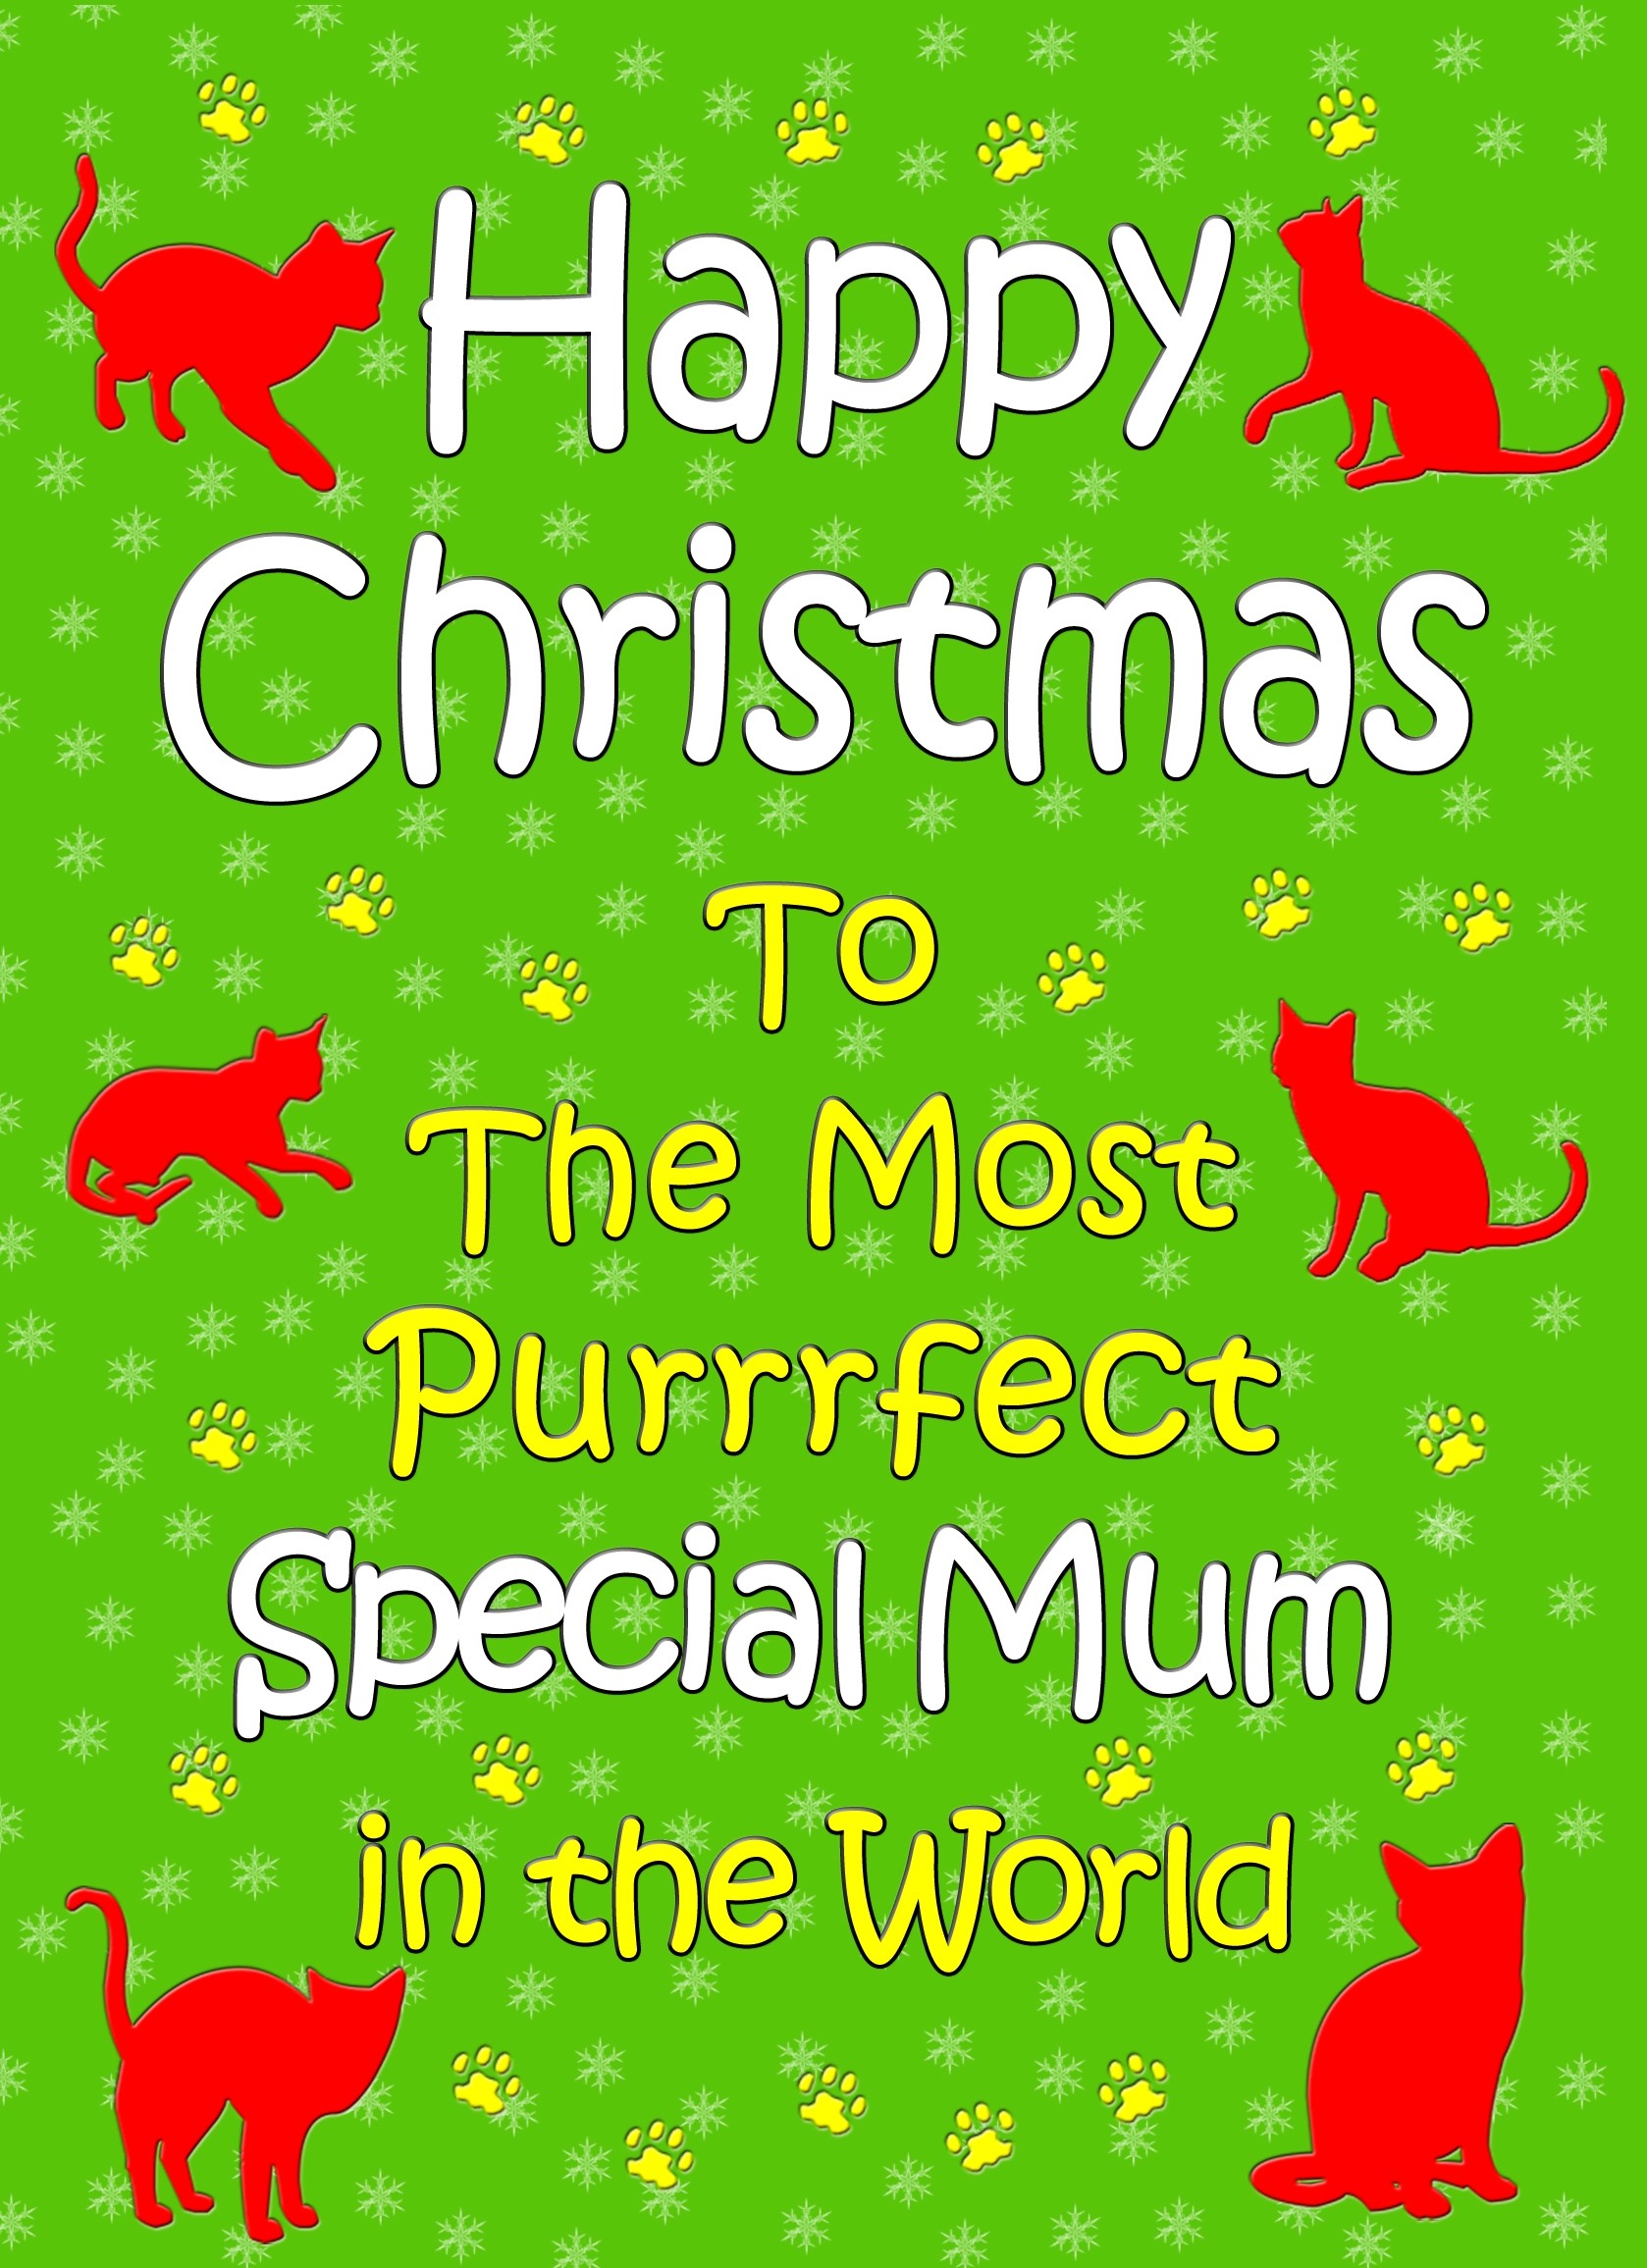 From The Cat Christmas Card (Special Mum, Green)